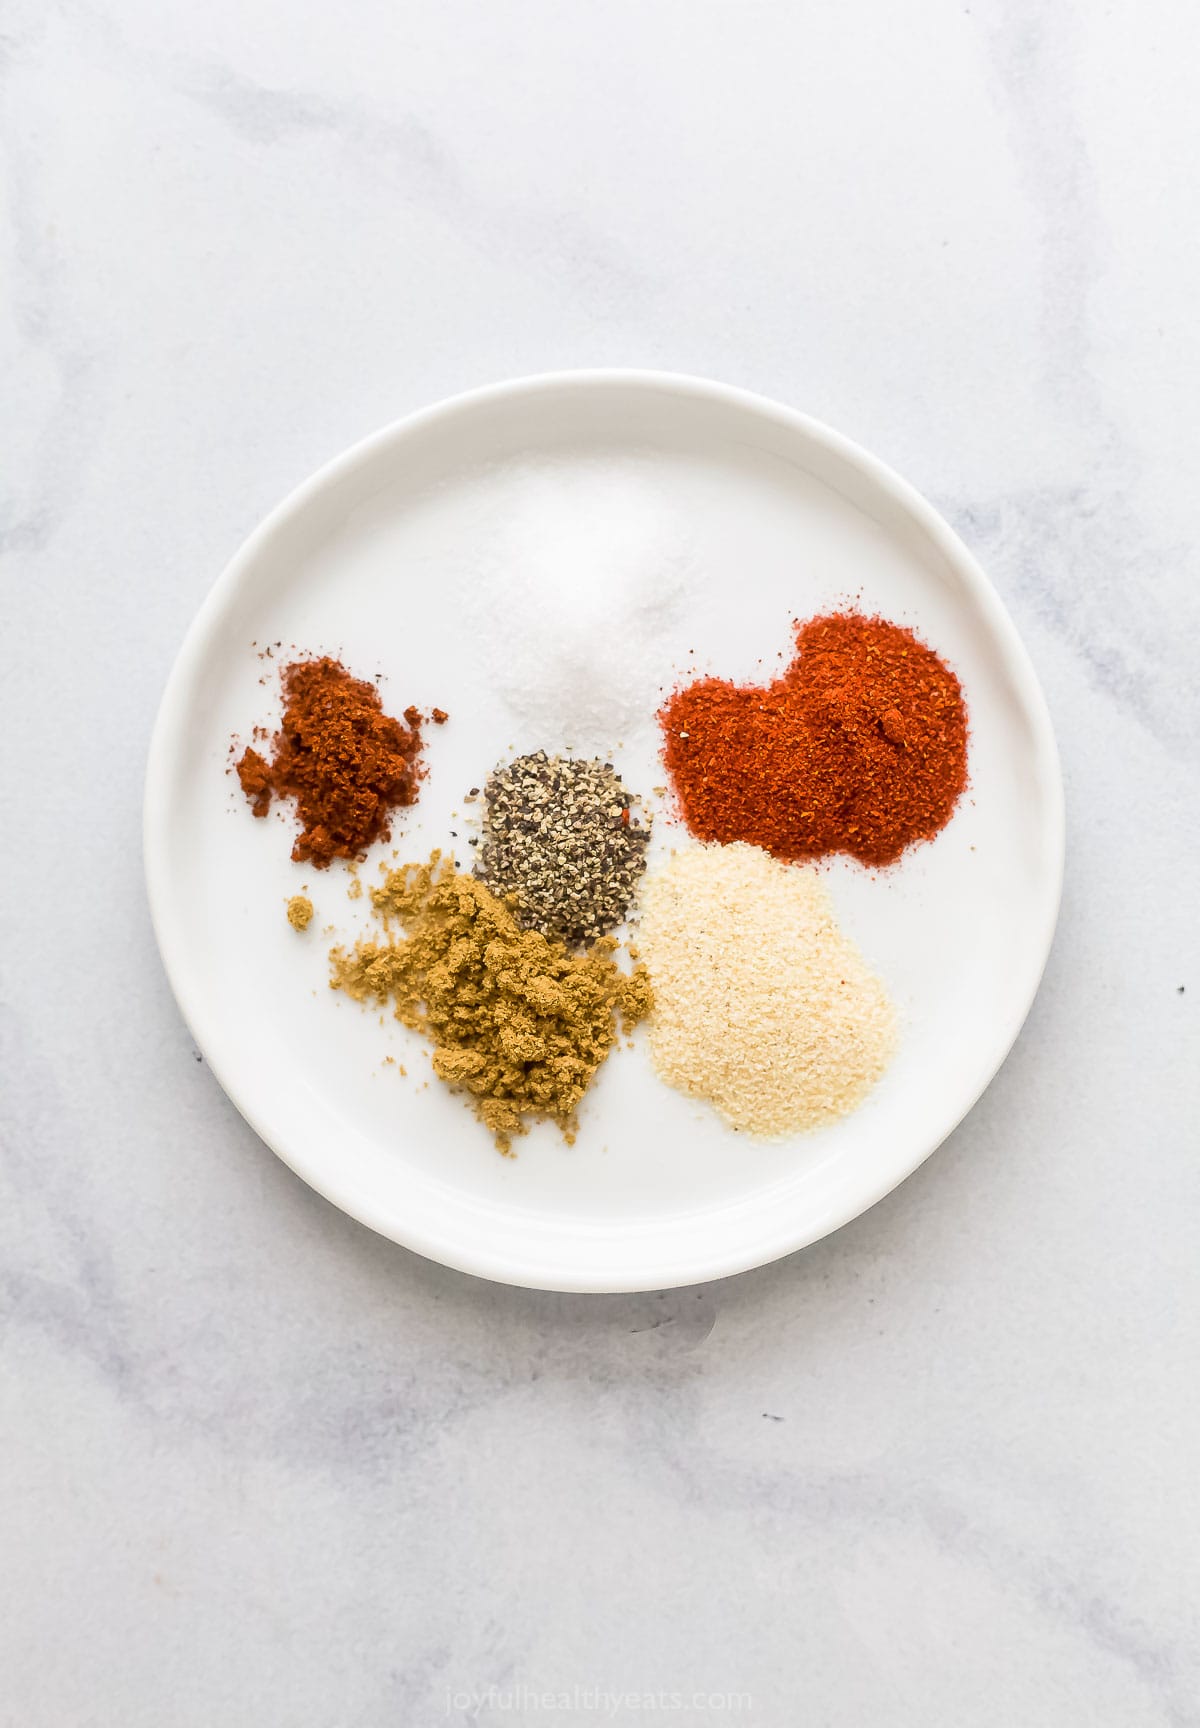 Spices for the ،e mix in a plate. 